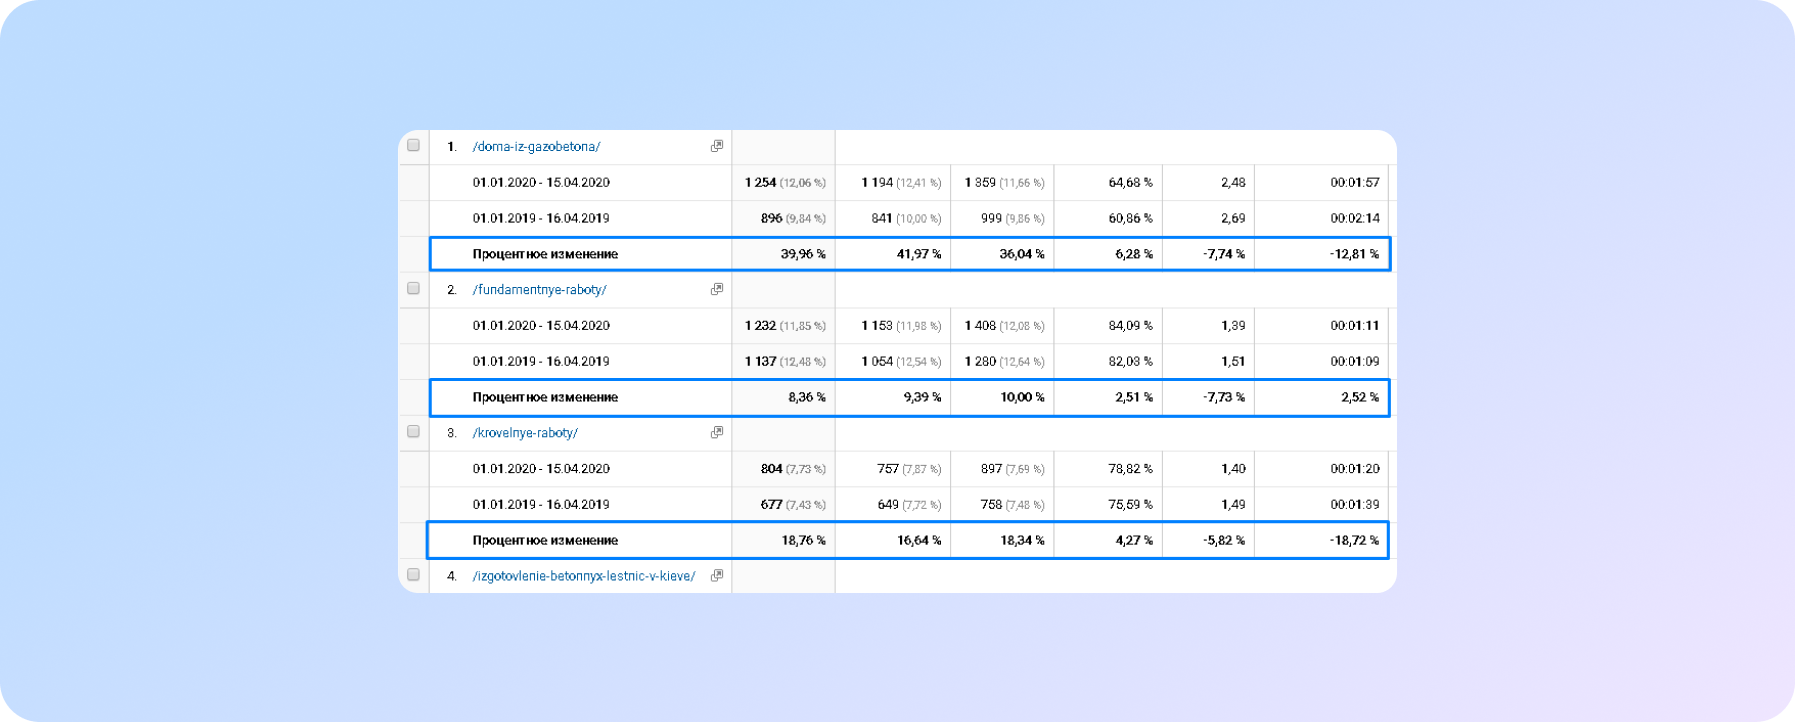 Dynamics of changes in organic traffic on the top pages of the site in comparison 2019 and 2020